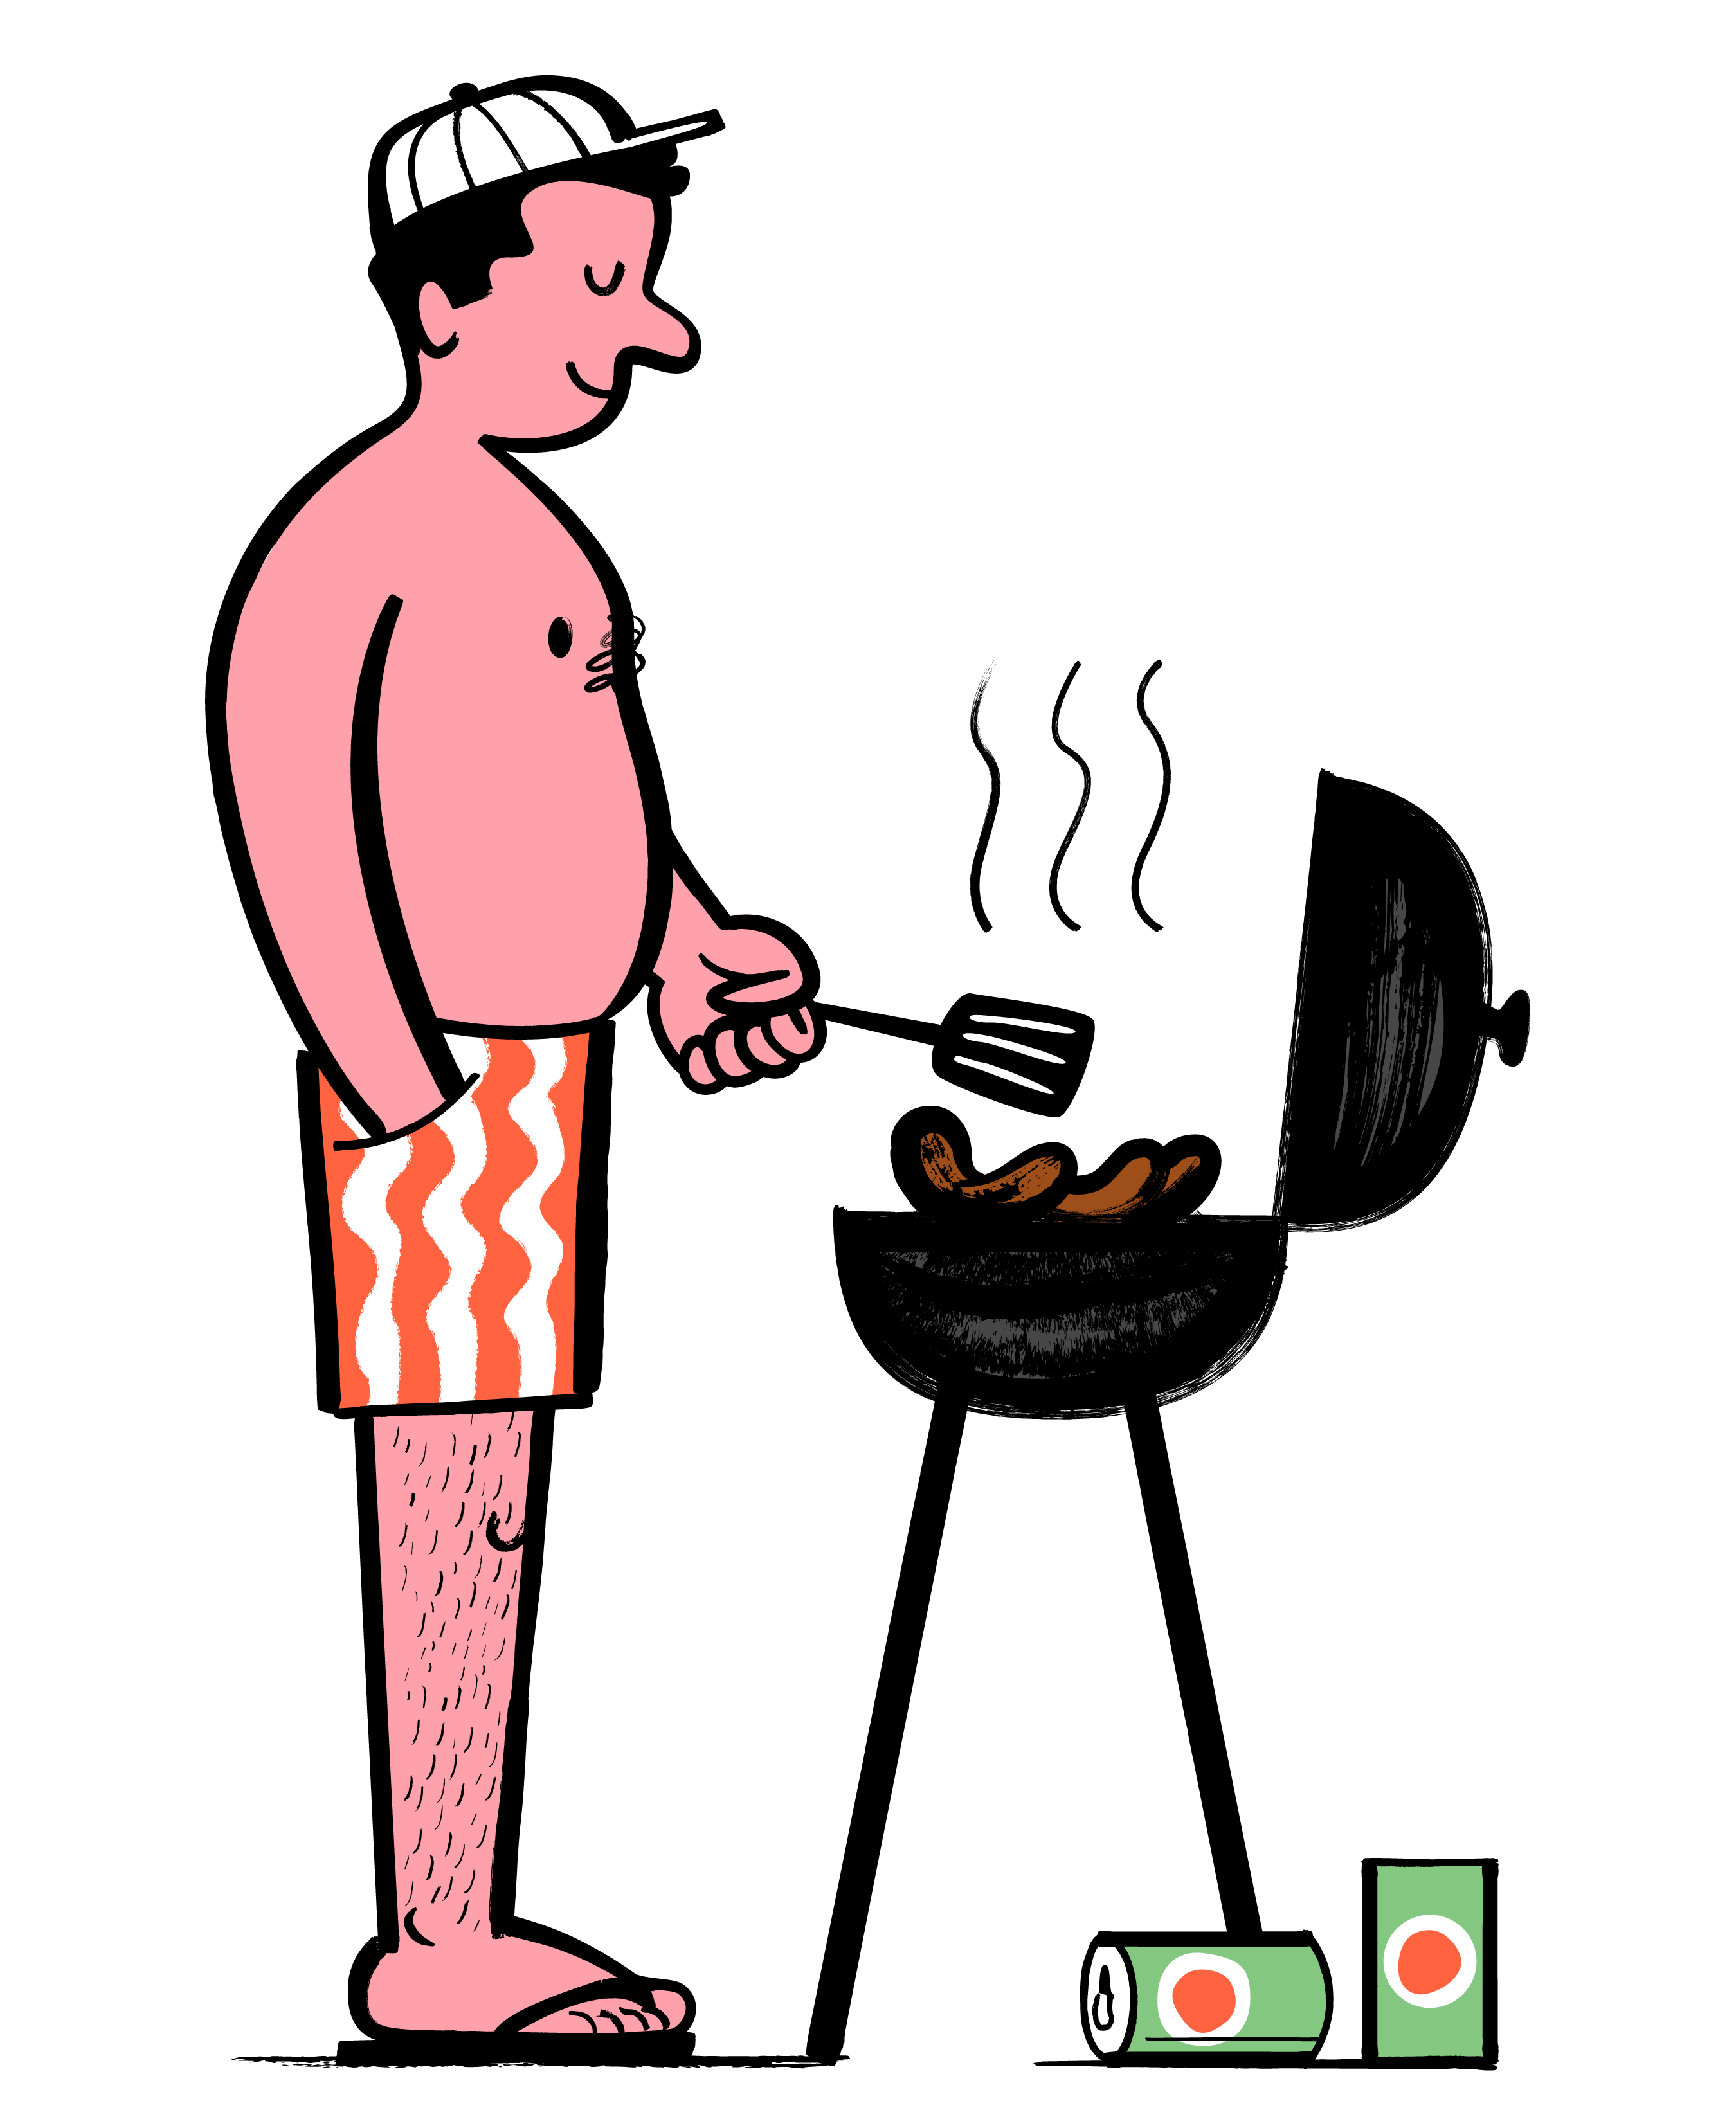 Illustration of a man cooking on a barbeque